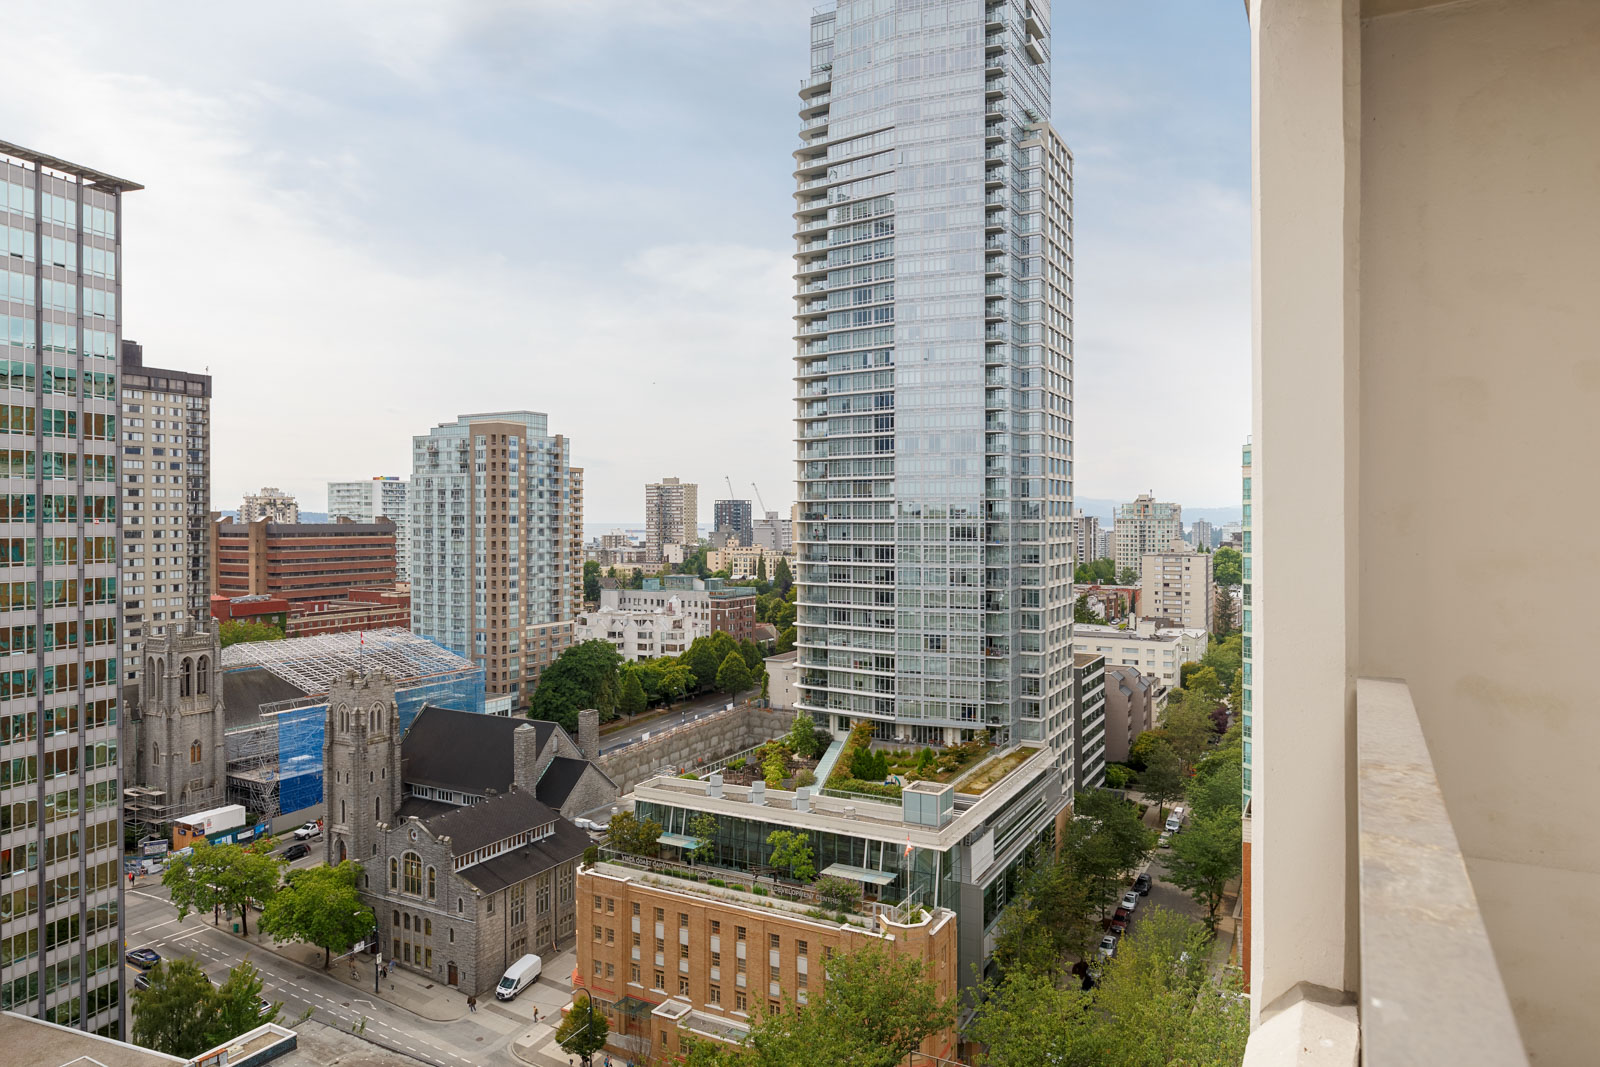 View of the city from Downtown Vancouver rental condo.